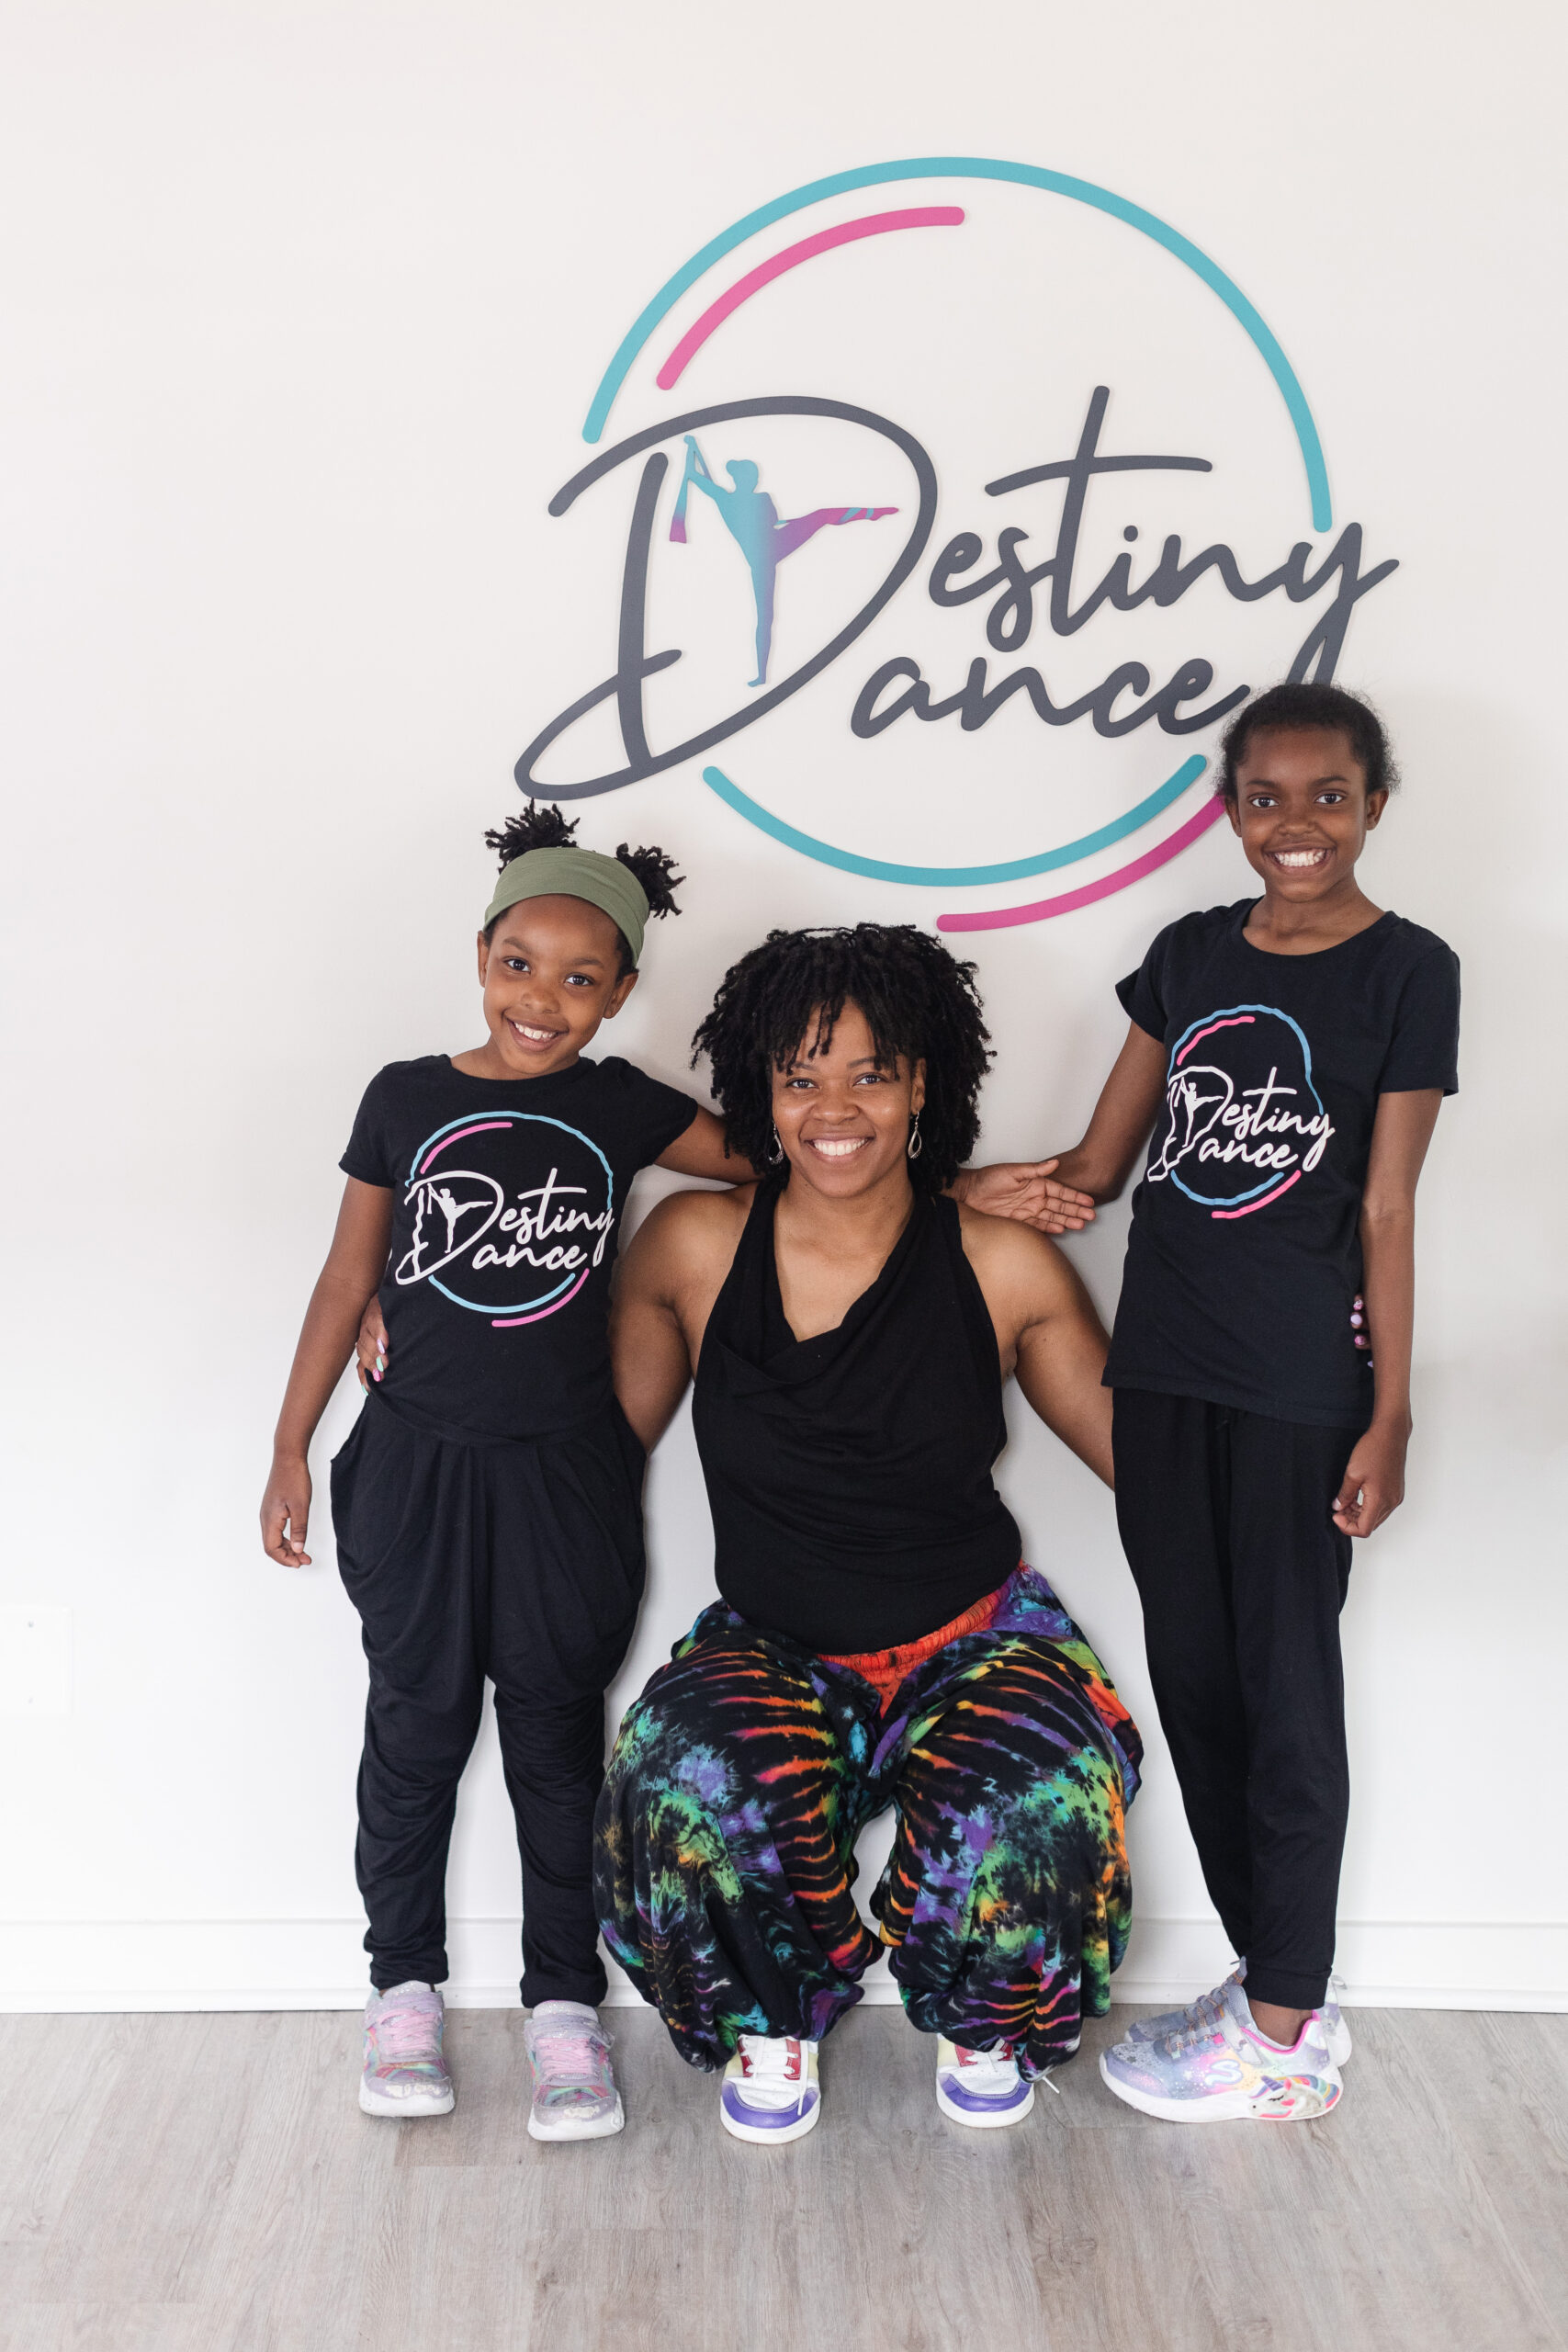 Ms April, founder of Destiny Dance, poses with her two daughters, both enrolled in Destiny Dance